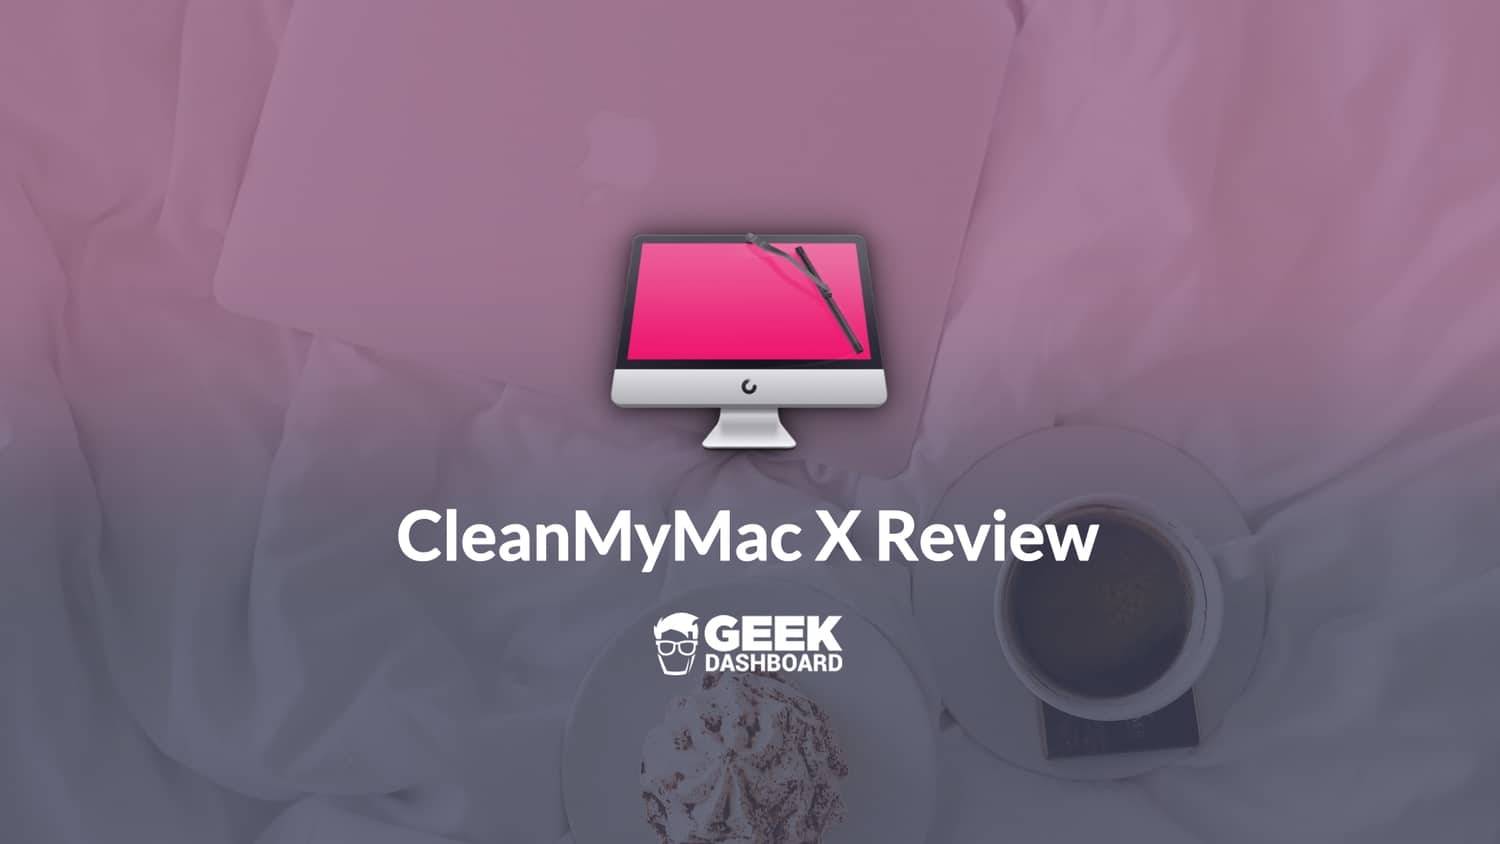 cleanmymac x review programming